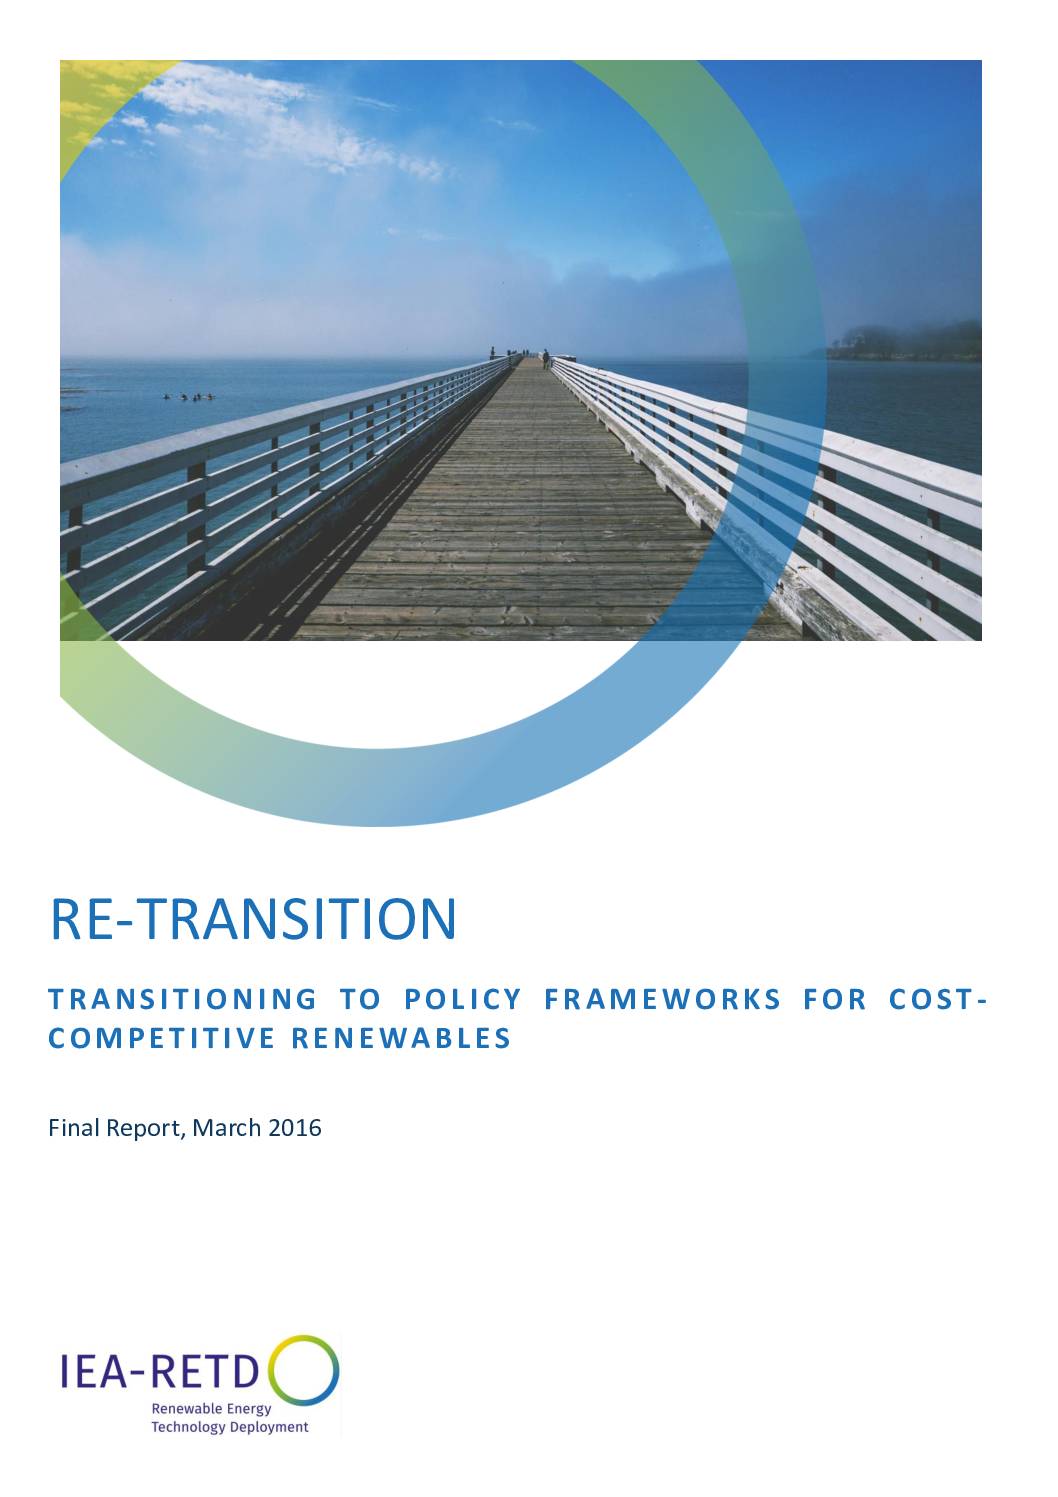 Re-Transition: Transitioning to Policy Frameworks for Cost-Competitive Renewables